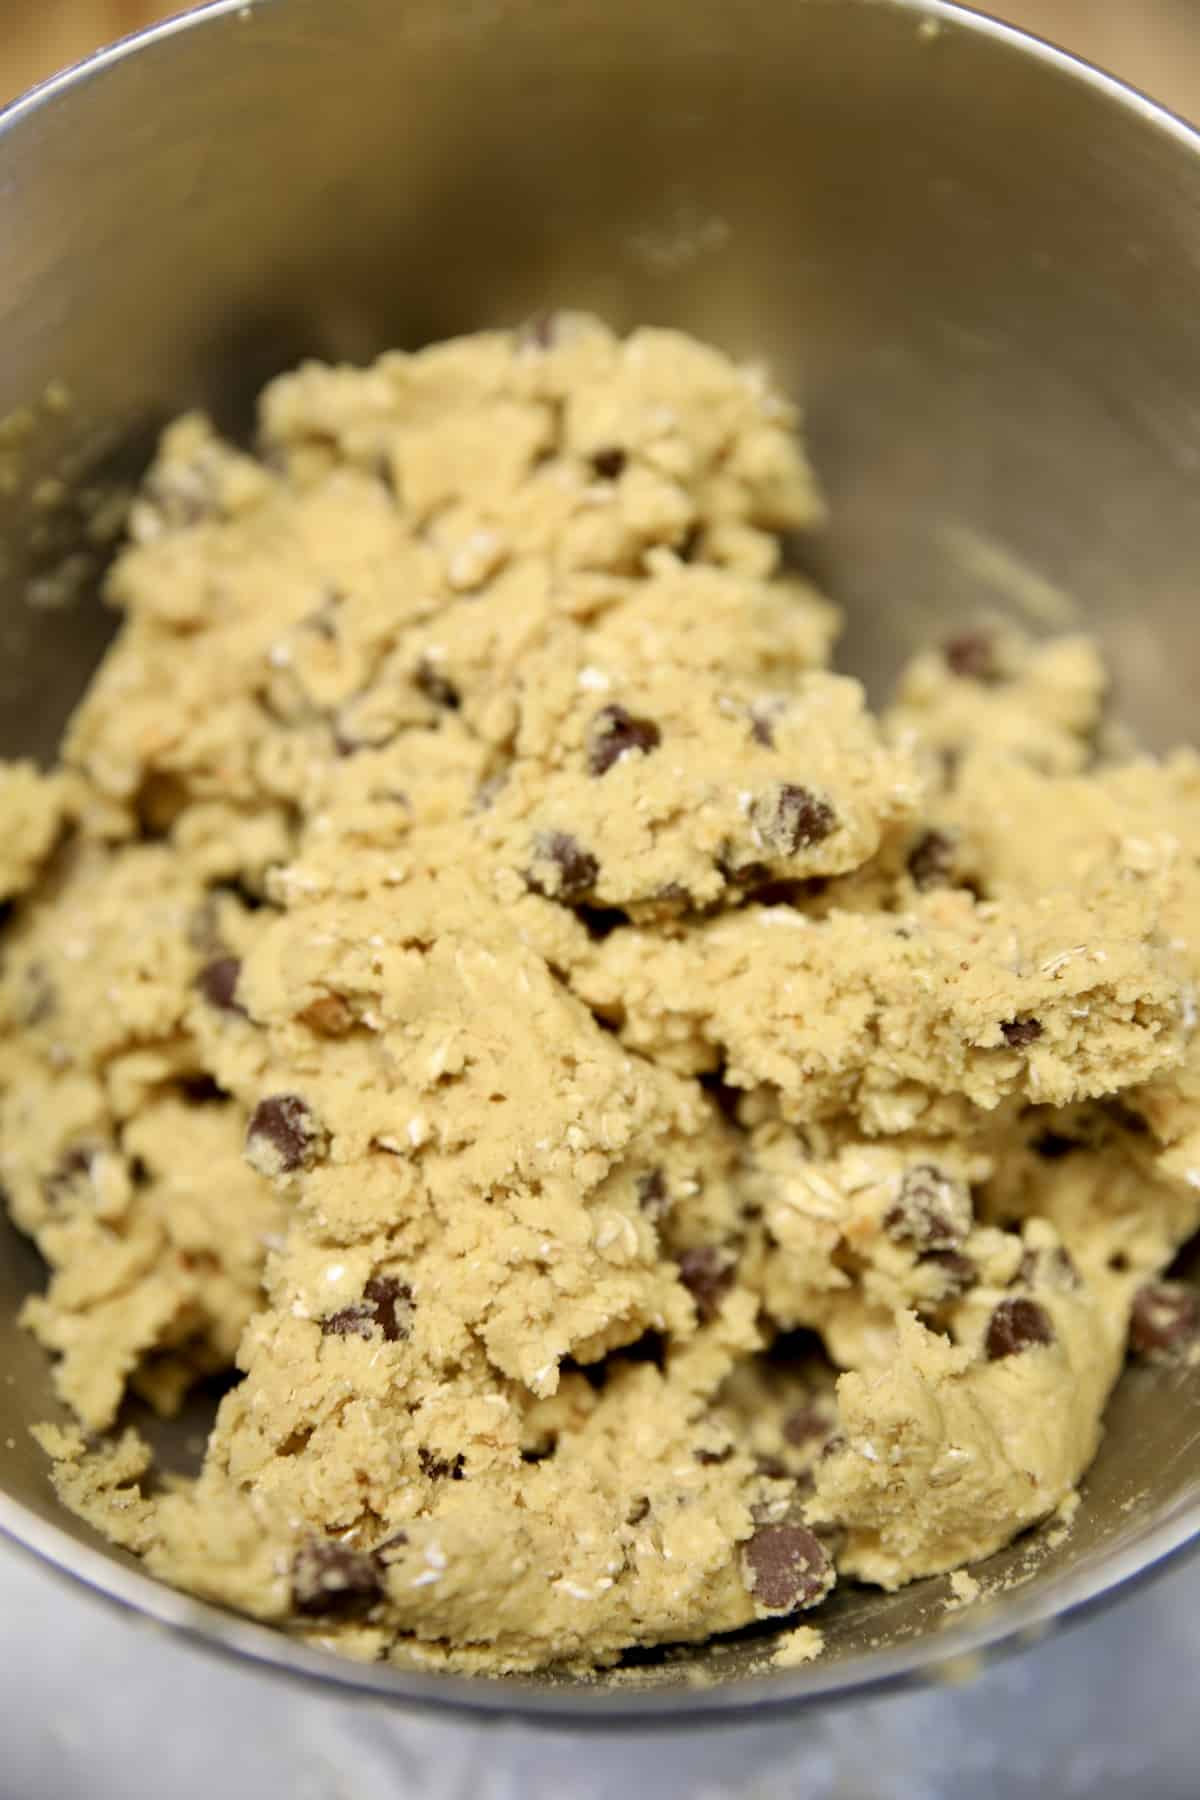 Peanut butter chocolate chip cookie dough.